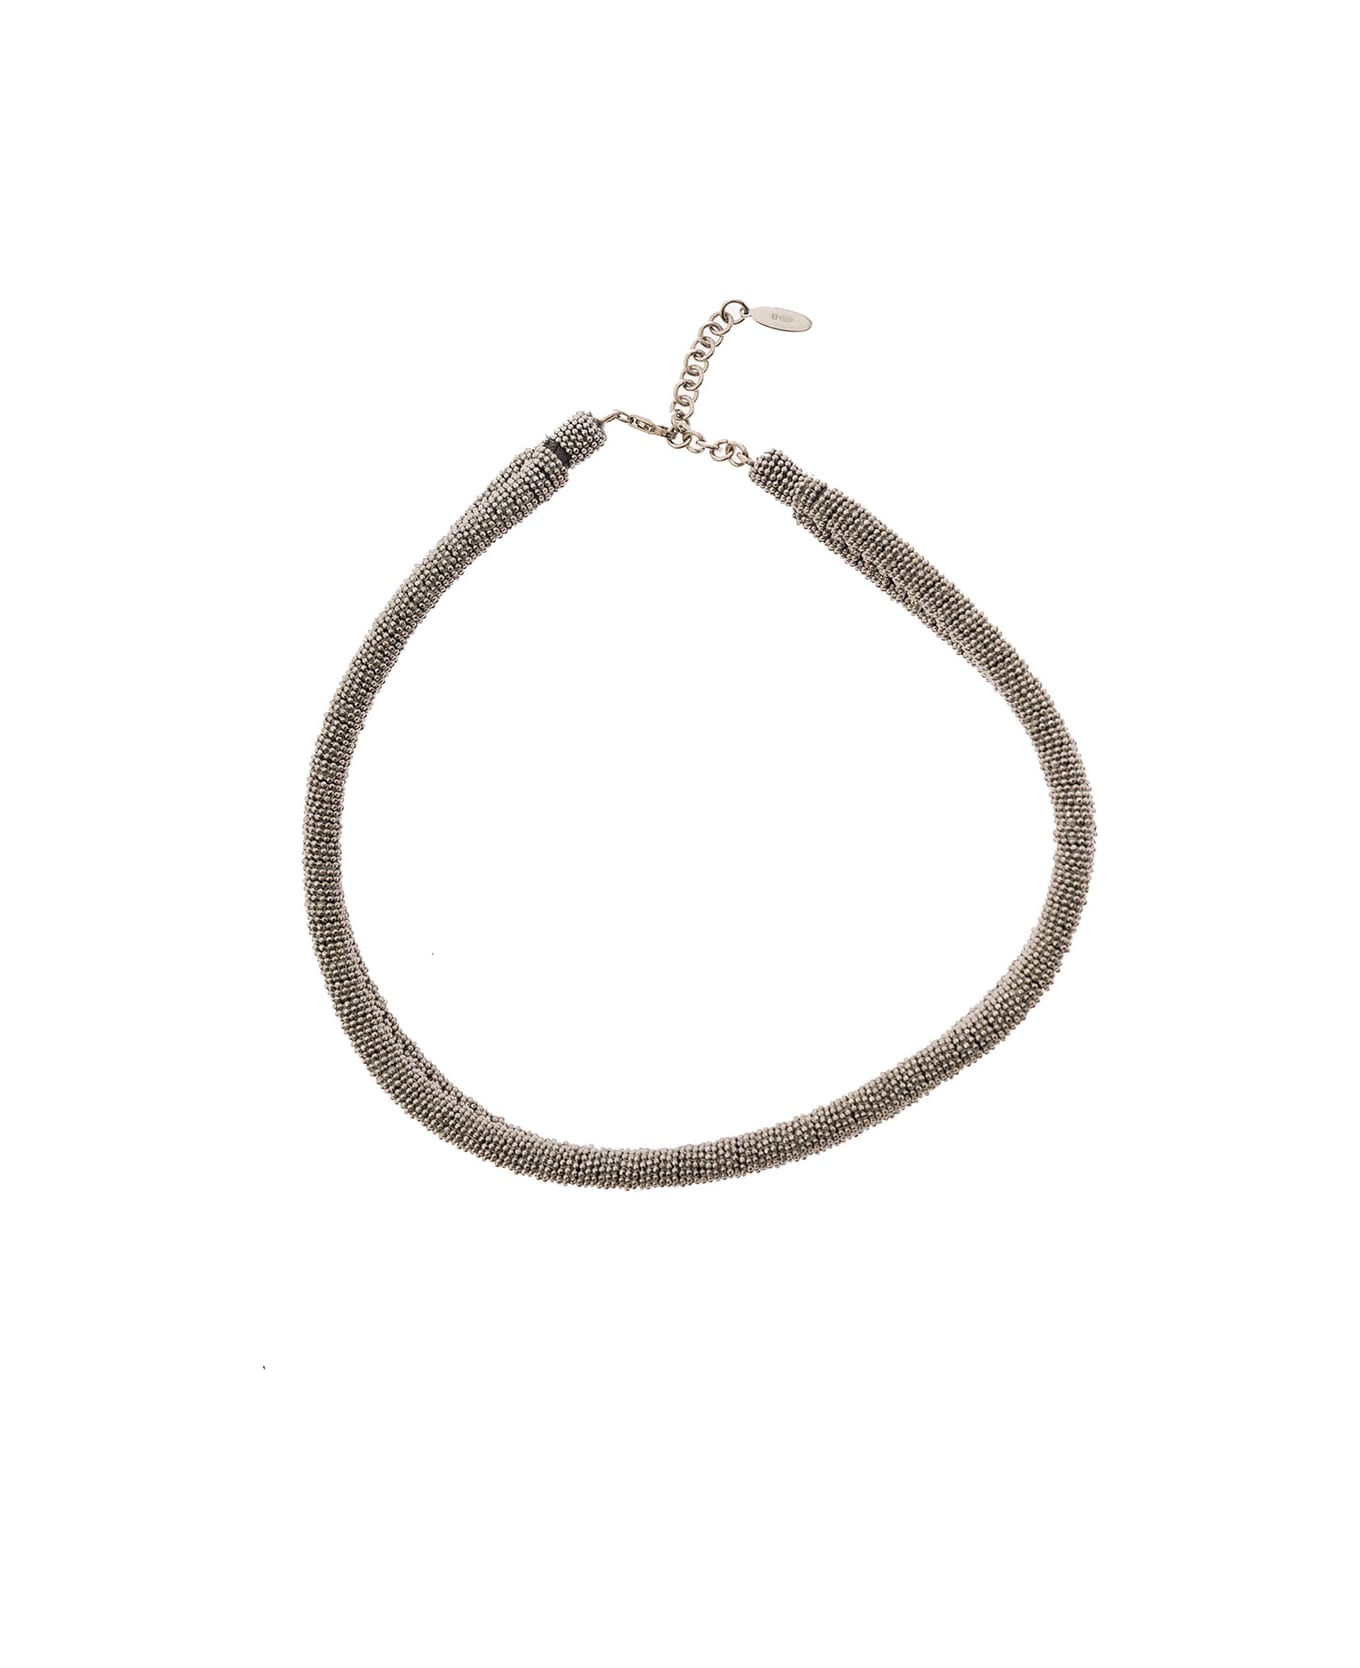 Brunello Cucinelli 'monile' Necklace - Grey ネックレス